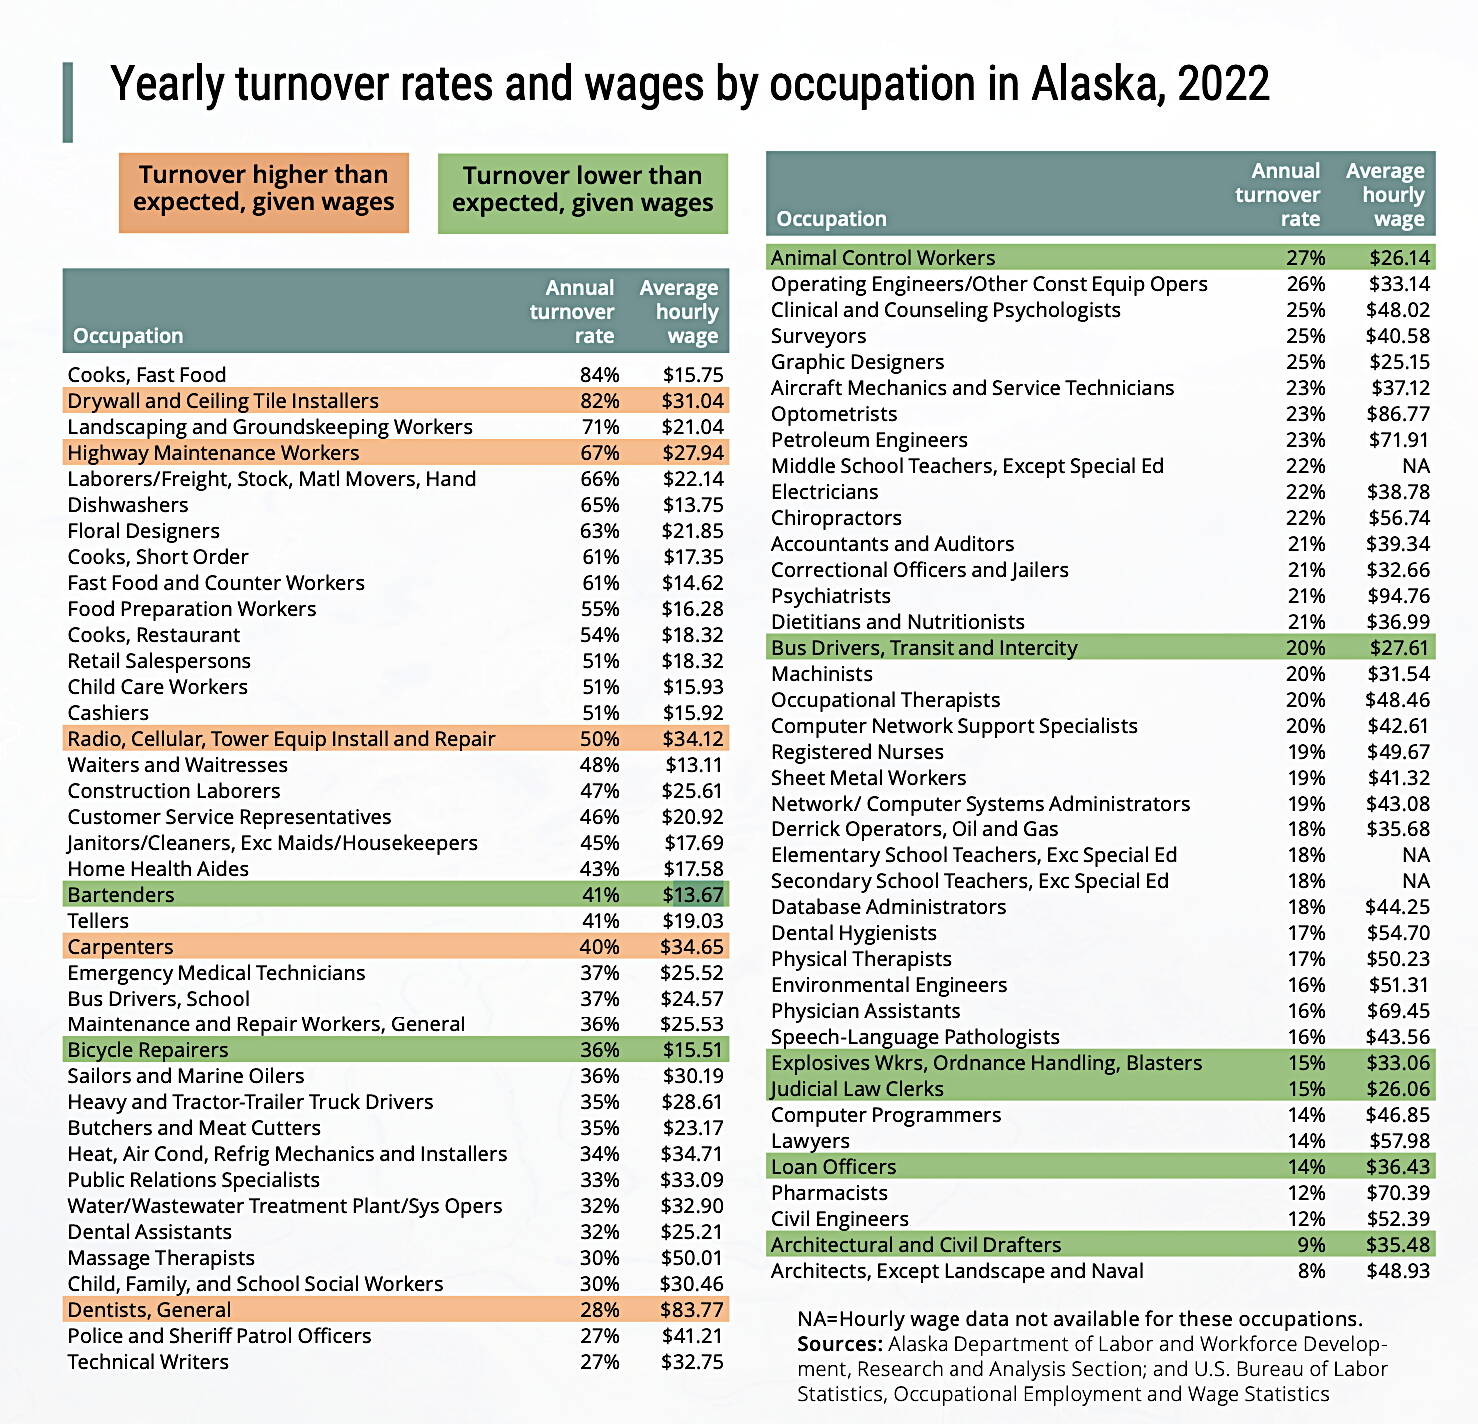 A chart shows turnover rates and average hourly wages for various jobs in Alaska in 2022, along with highlighting occupations where there was more or less turnover than expected given the wages paid. (Alaska Department of Labor and Workforce Development)